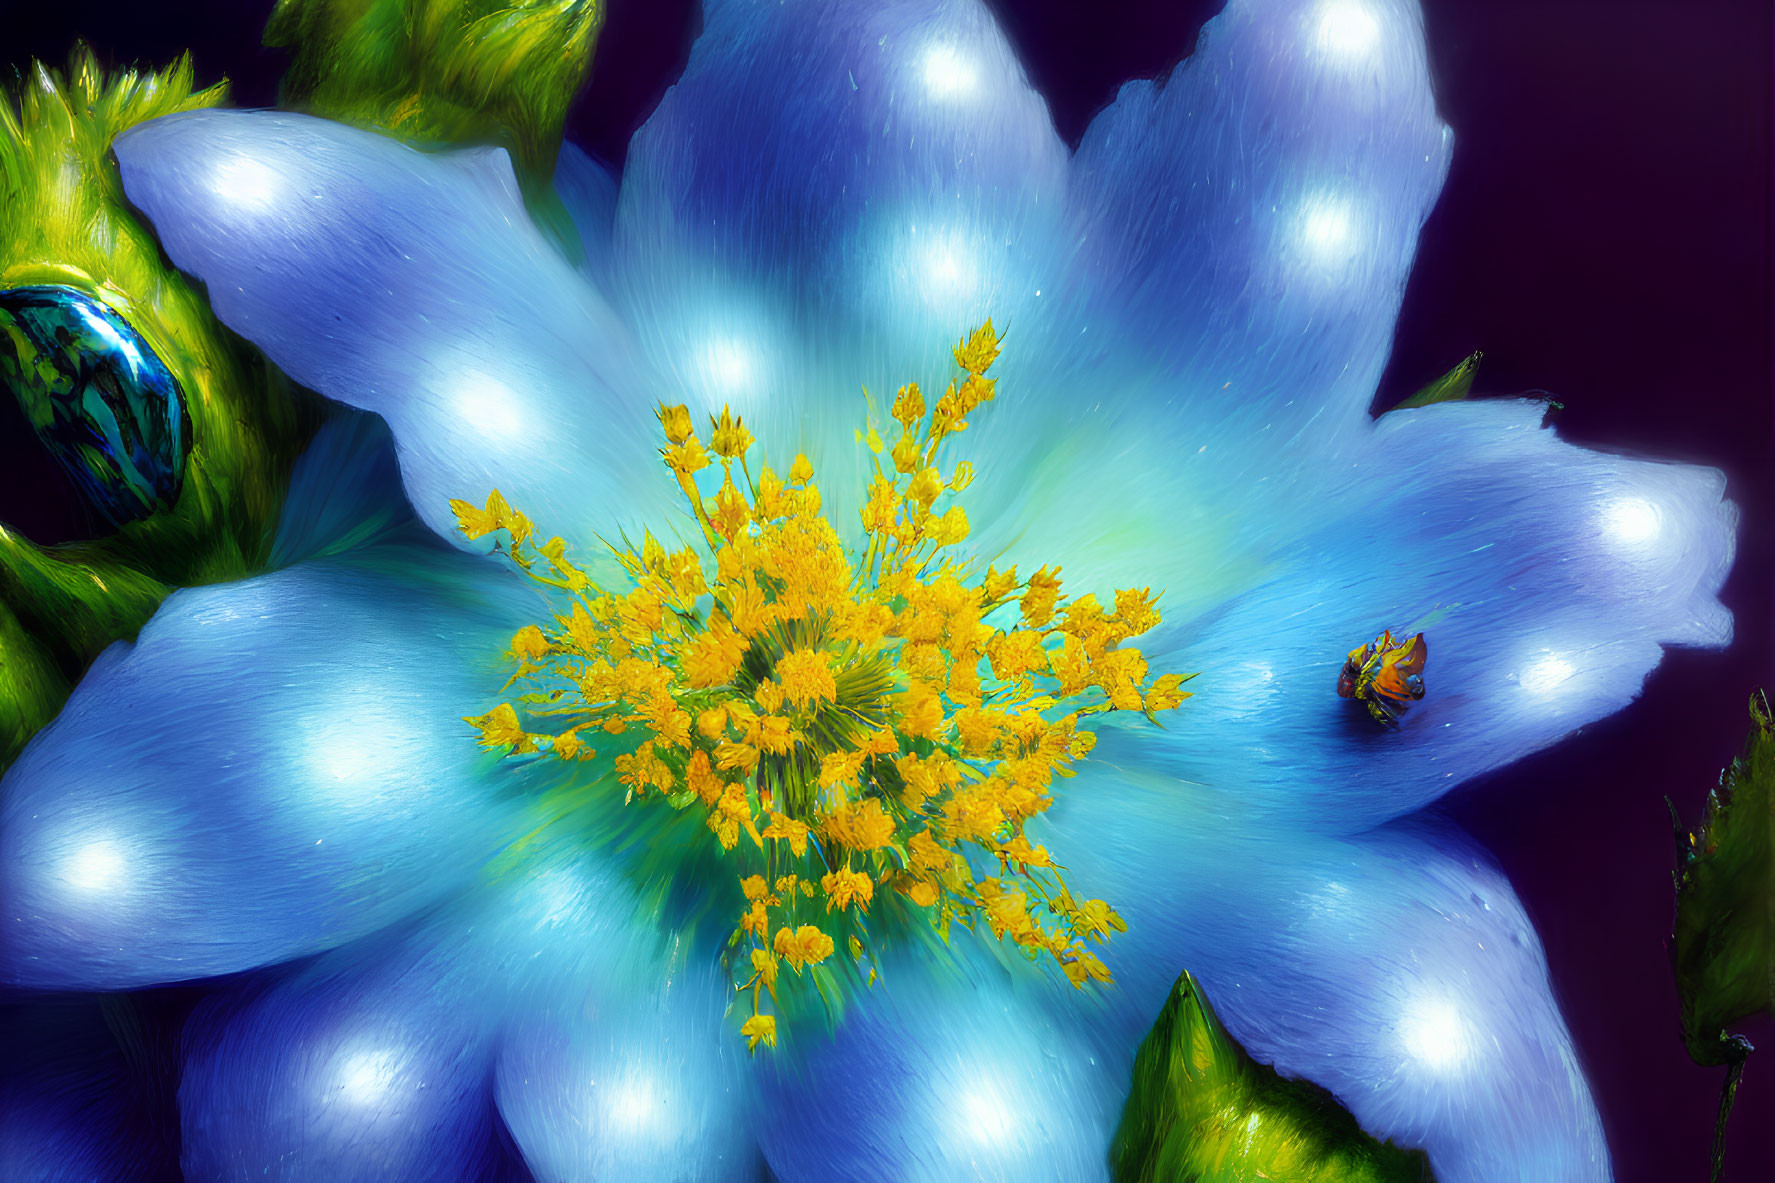 Close-up of Vibrant Blue Flower with Yellow Center and Water Droplets